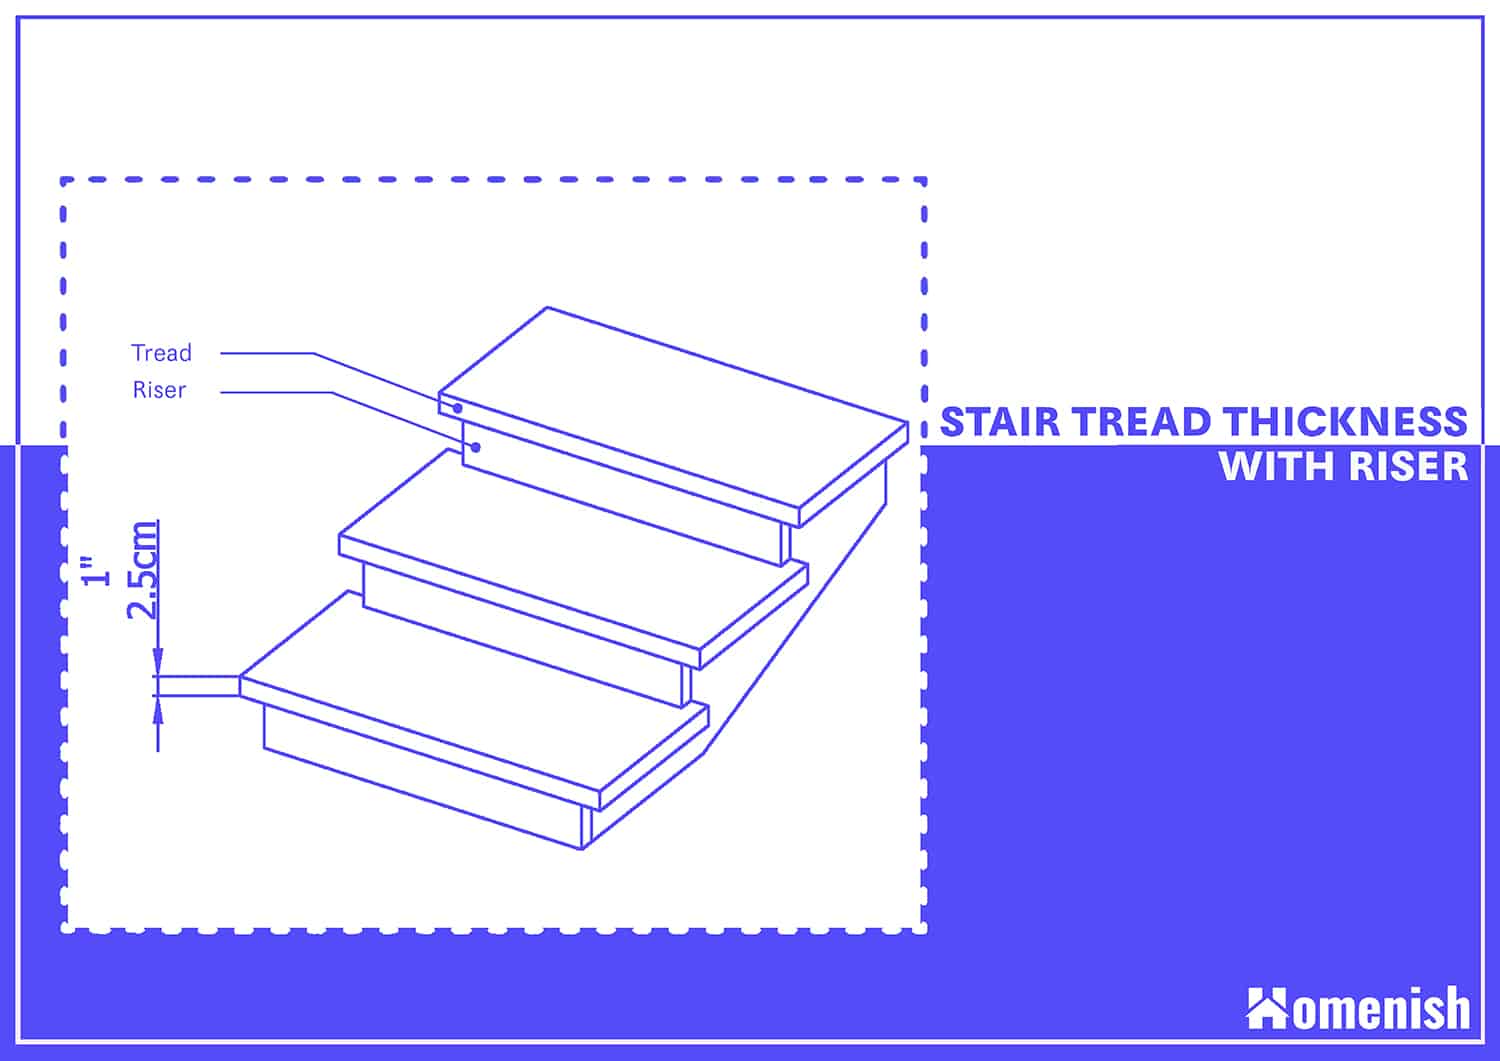 Standard Stair Tread Thickness with Riser